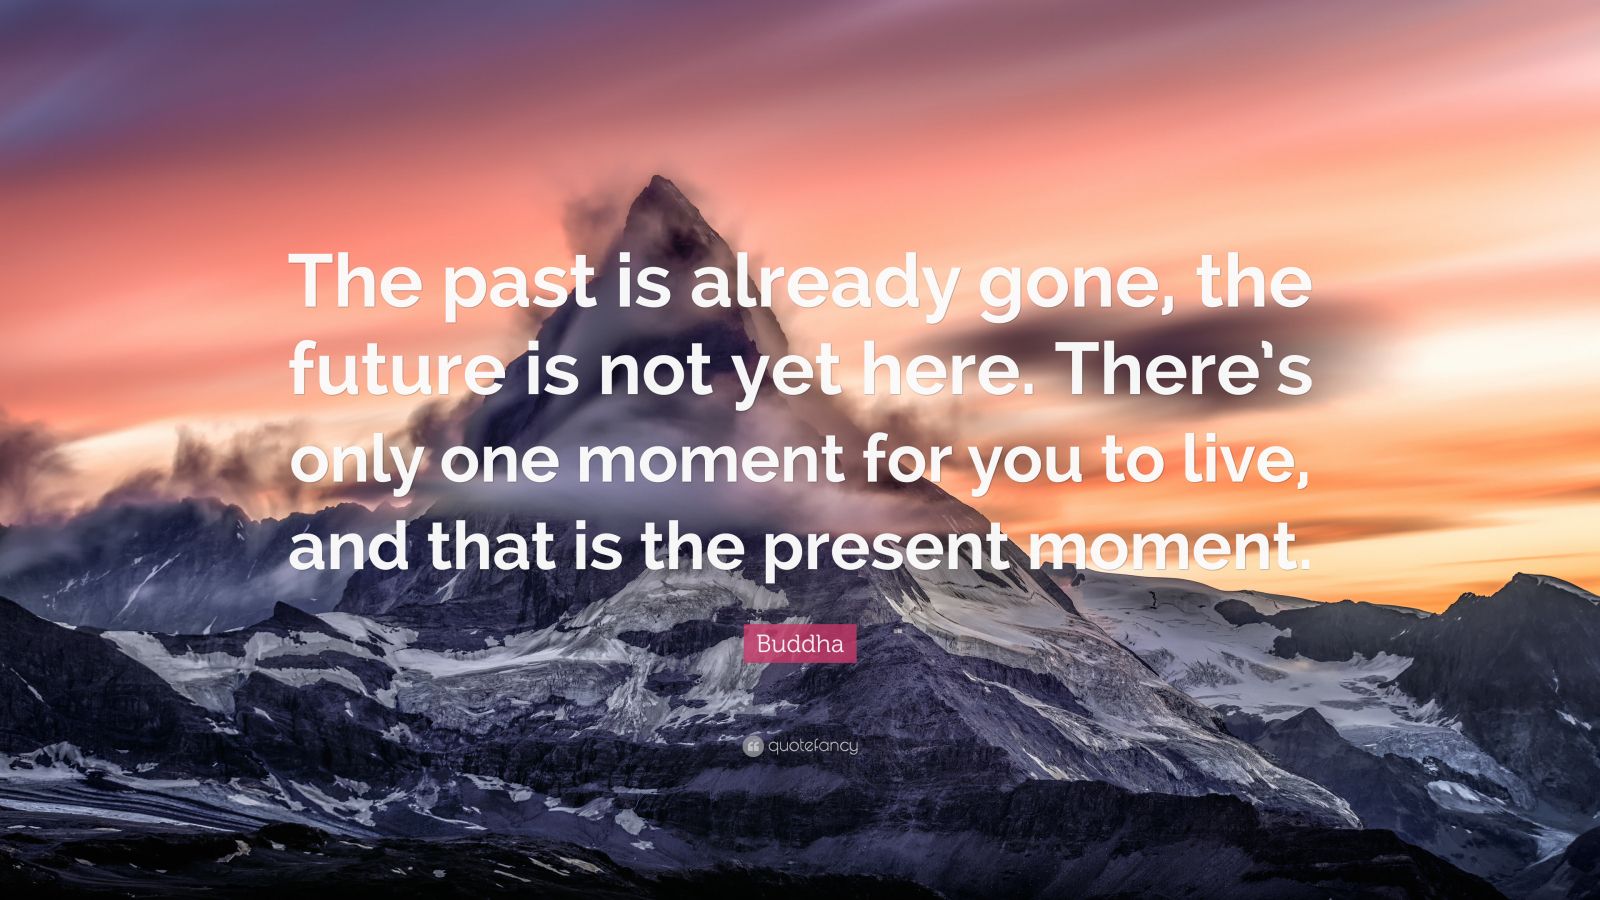 Buddha Quote: “The past is already gone, the future is not yet here ...